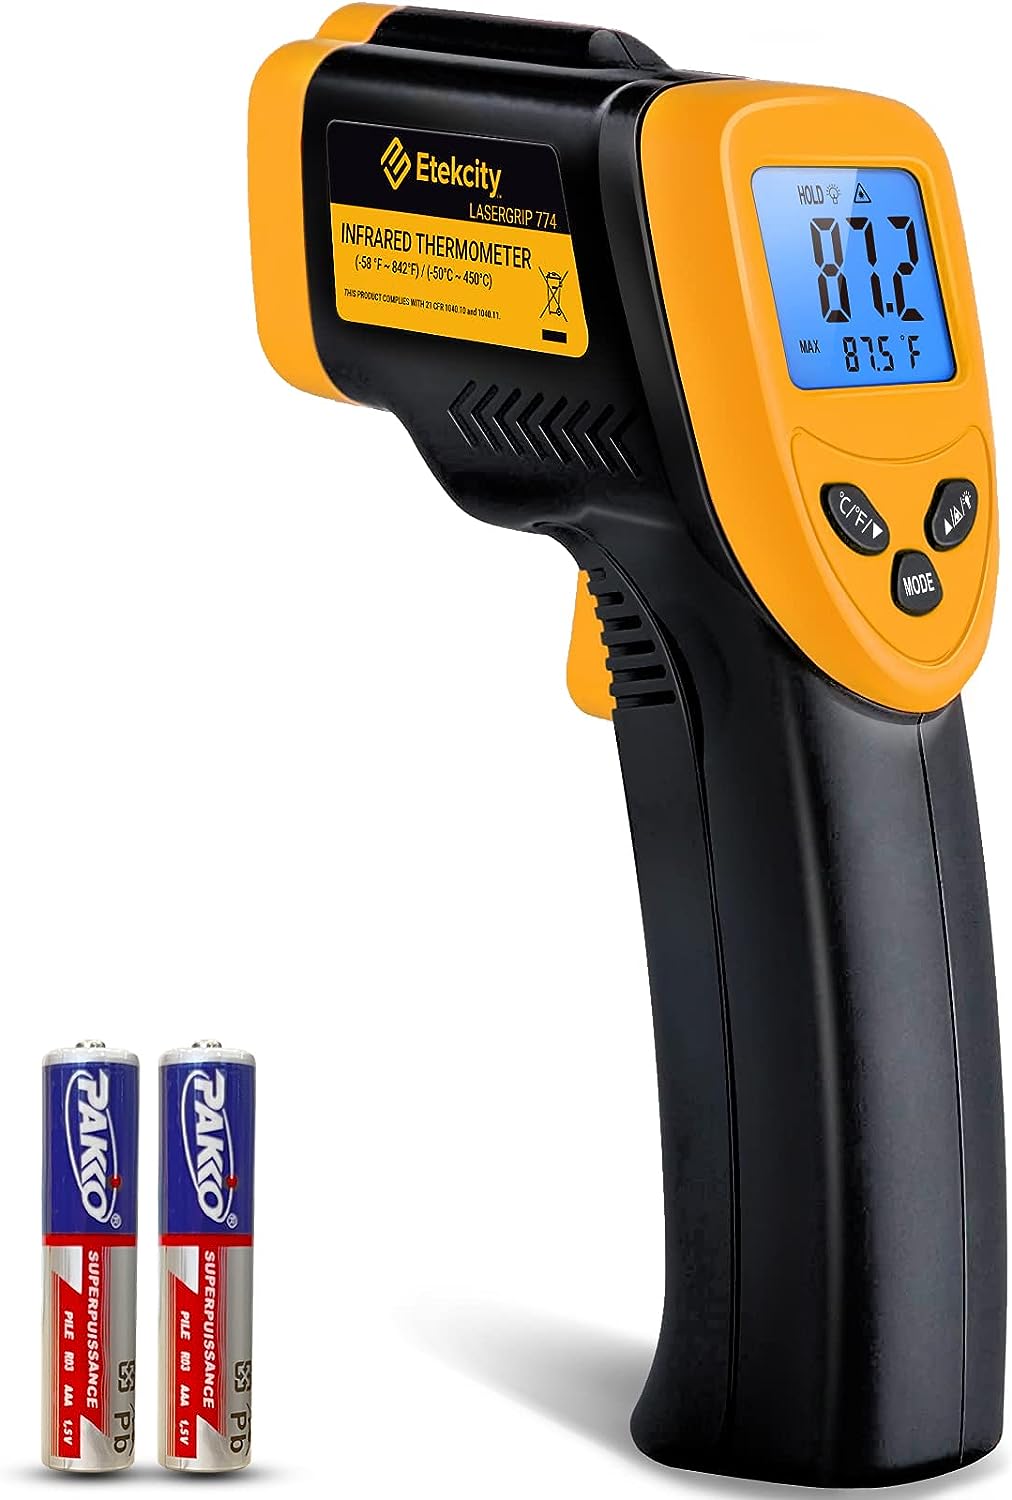 ir thermometer detailed review